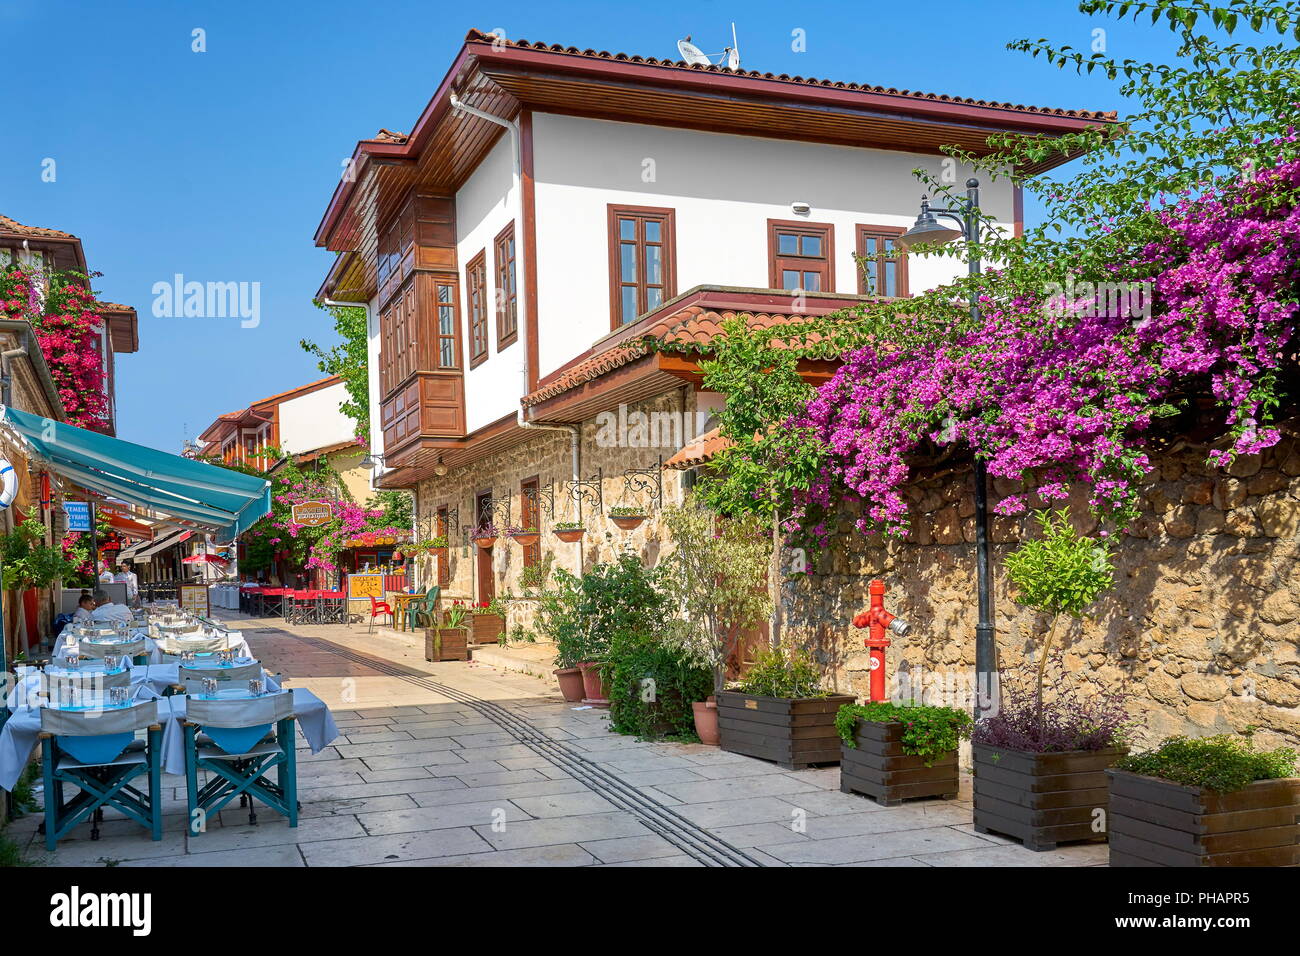 Blooming flowers at Kaleici old town streets, Antalya, Turkey Stock Photo